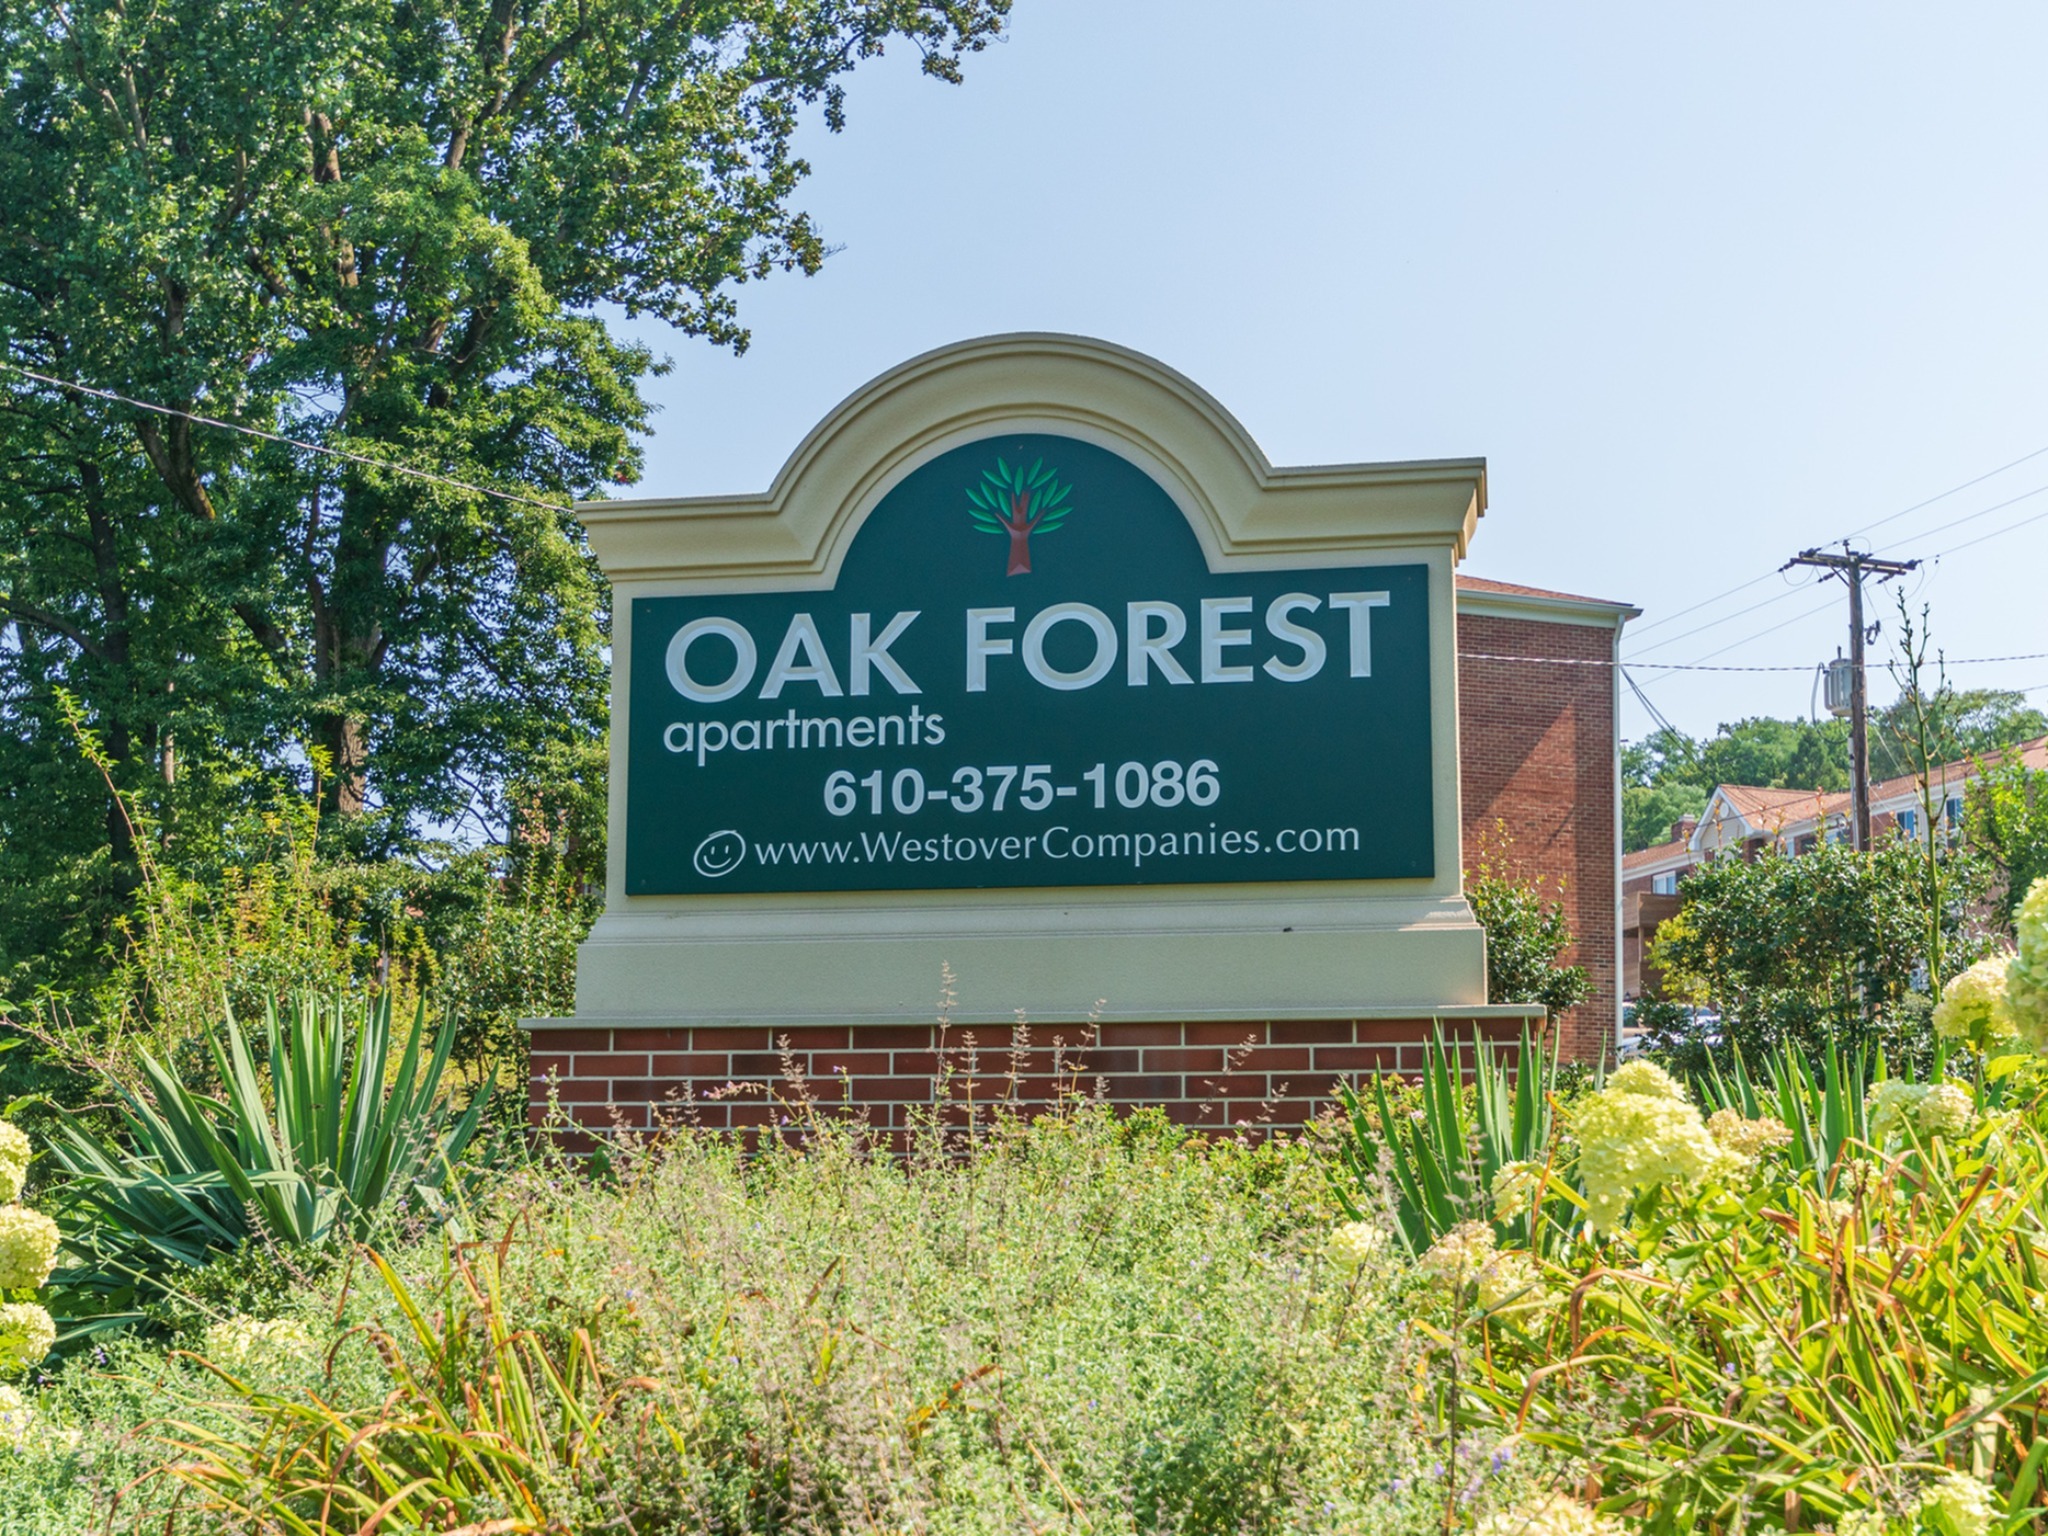 Oak Forest apartments welcome sign, fitted in a beautiful garden